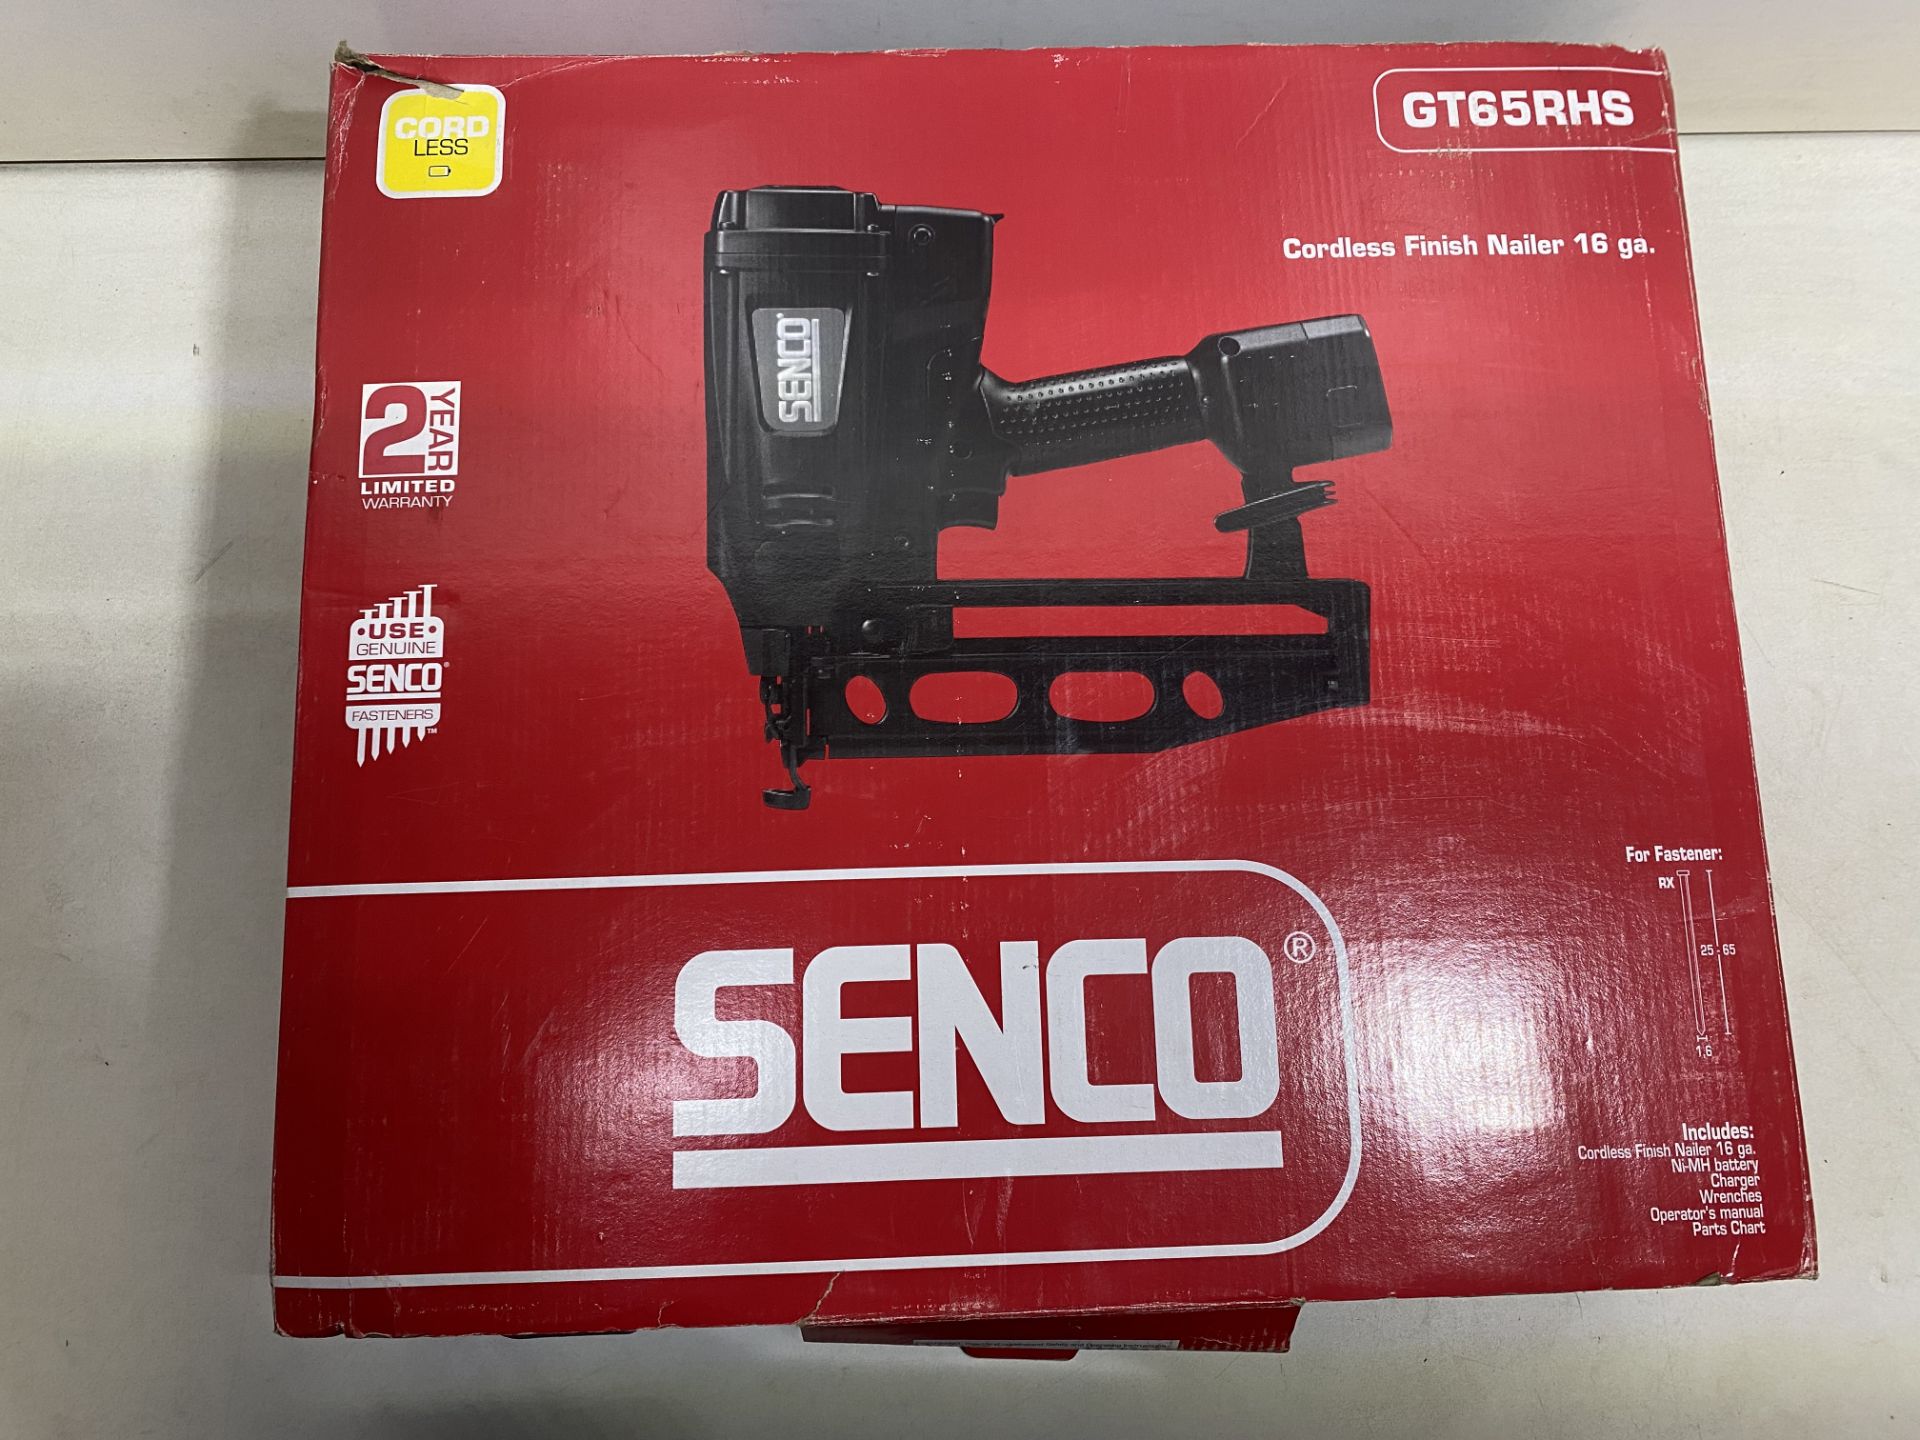 Senco GT65RHS Cordless Finish Nailer Empty Carry Case - Image 2 of 4